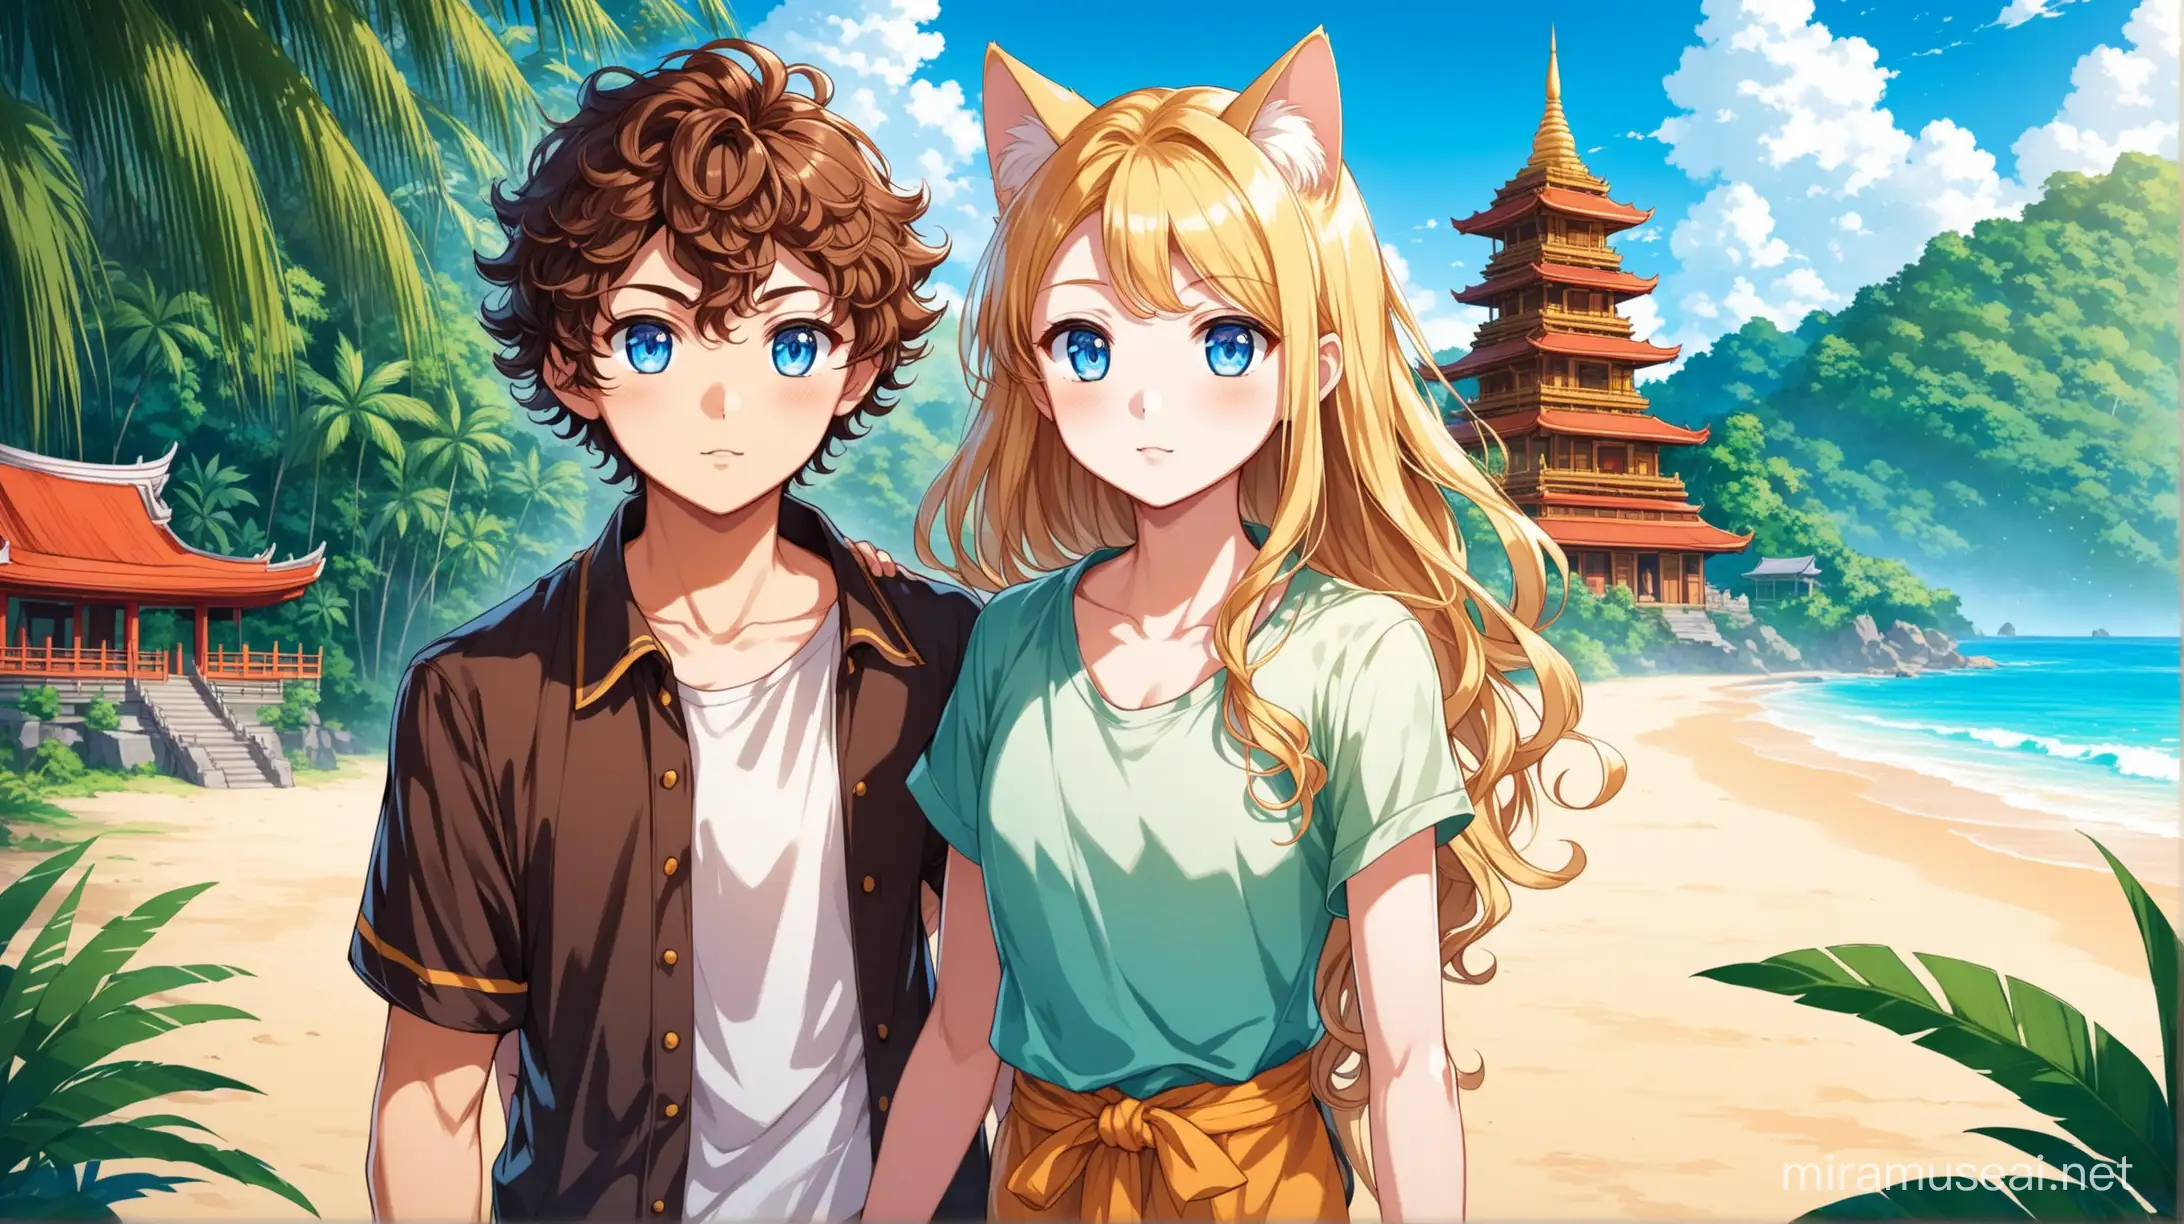 Young boy with brown curly hair, and blue eyes, young girl with long blond hair and blue eyes, travelling outfits, South East Asian jungle, beach, ancient Buddhist temple in the background, cat ears, anime style